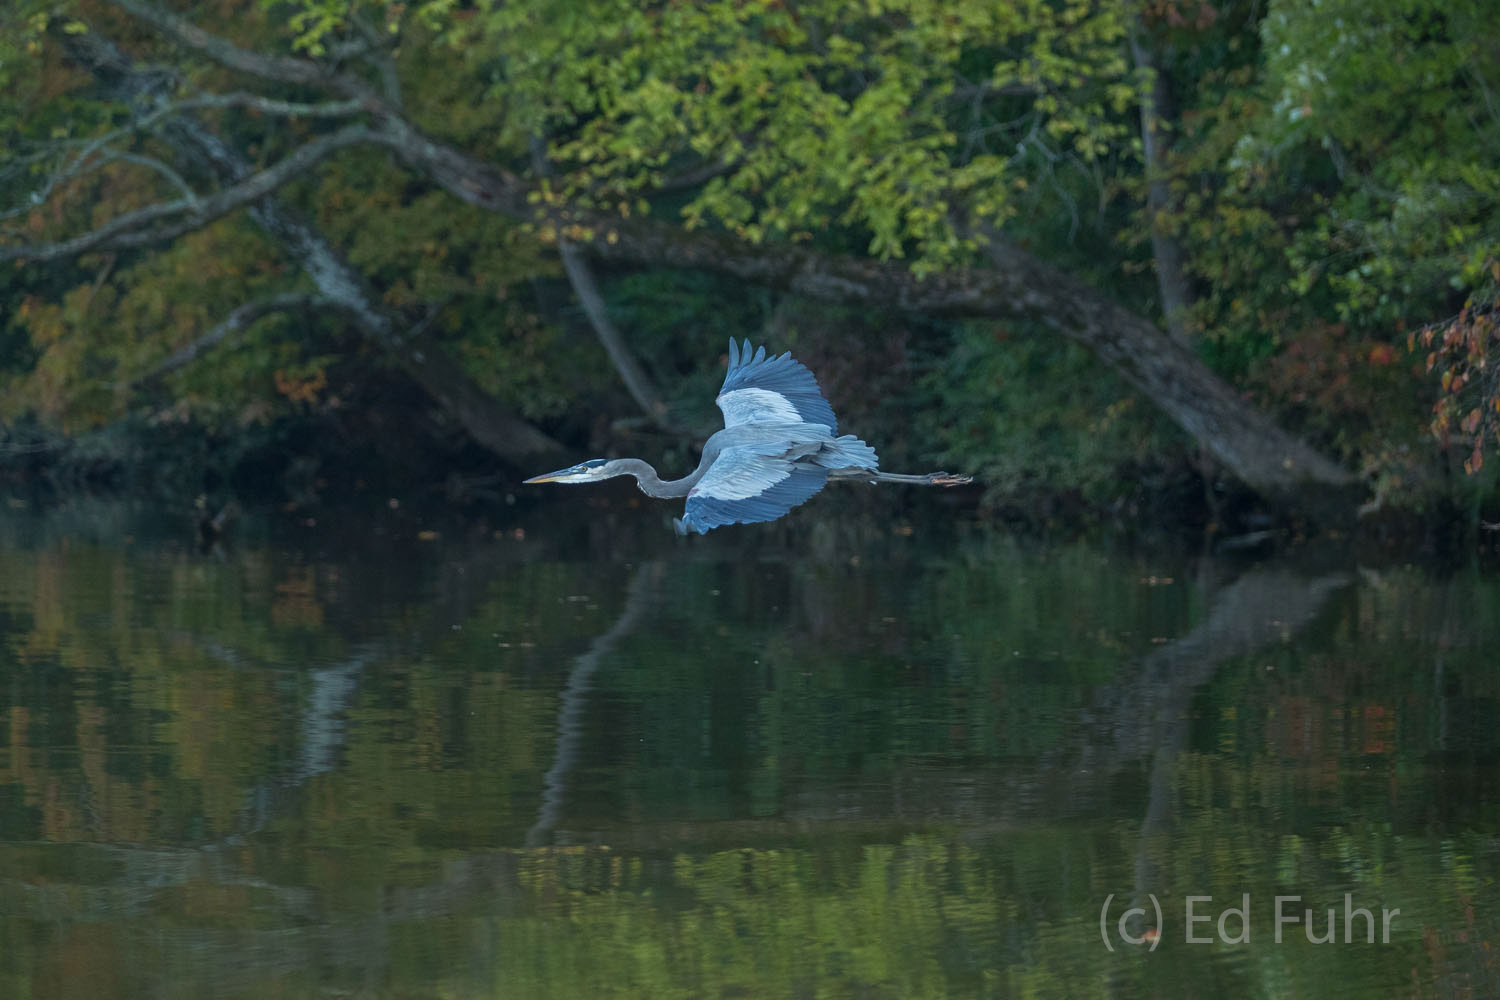 A blue heron flies low just above the James River, Virginia.